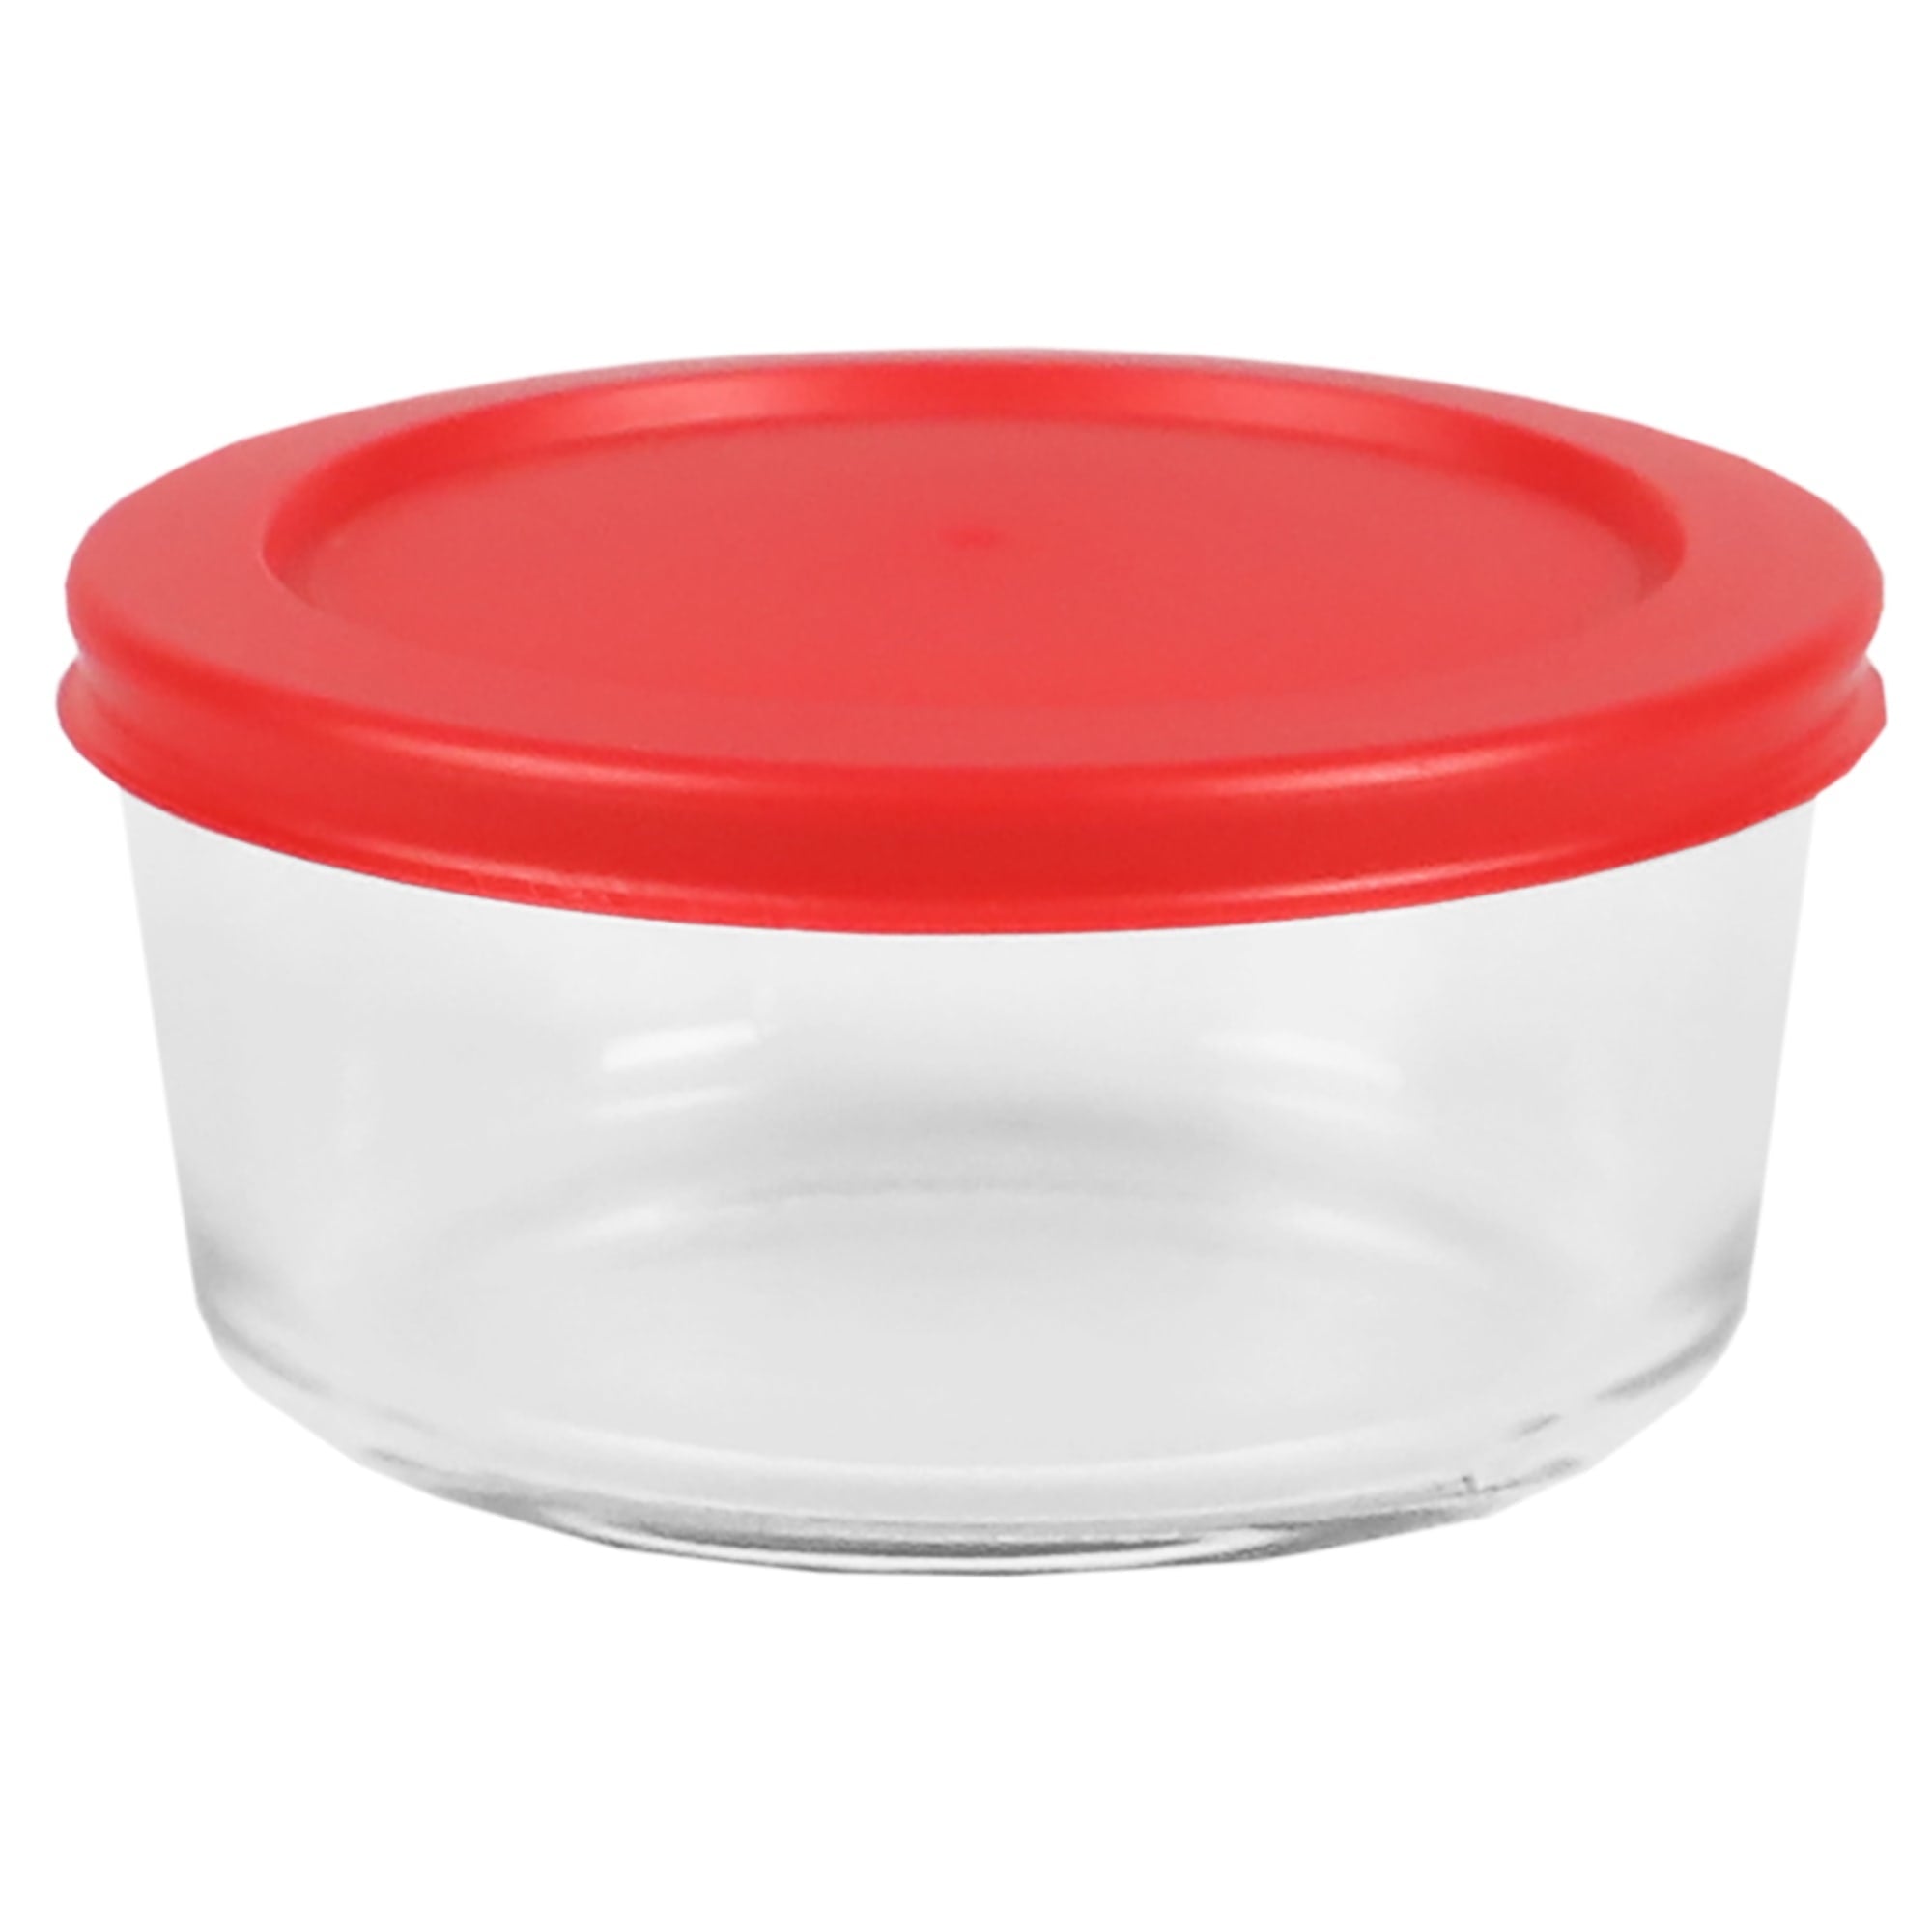 Home Basics 16 oz. Round Glass Food Storage Container with Red Lid, Clear $2.50 EACH, CASE PACK OF 12